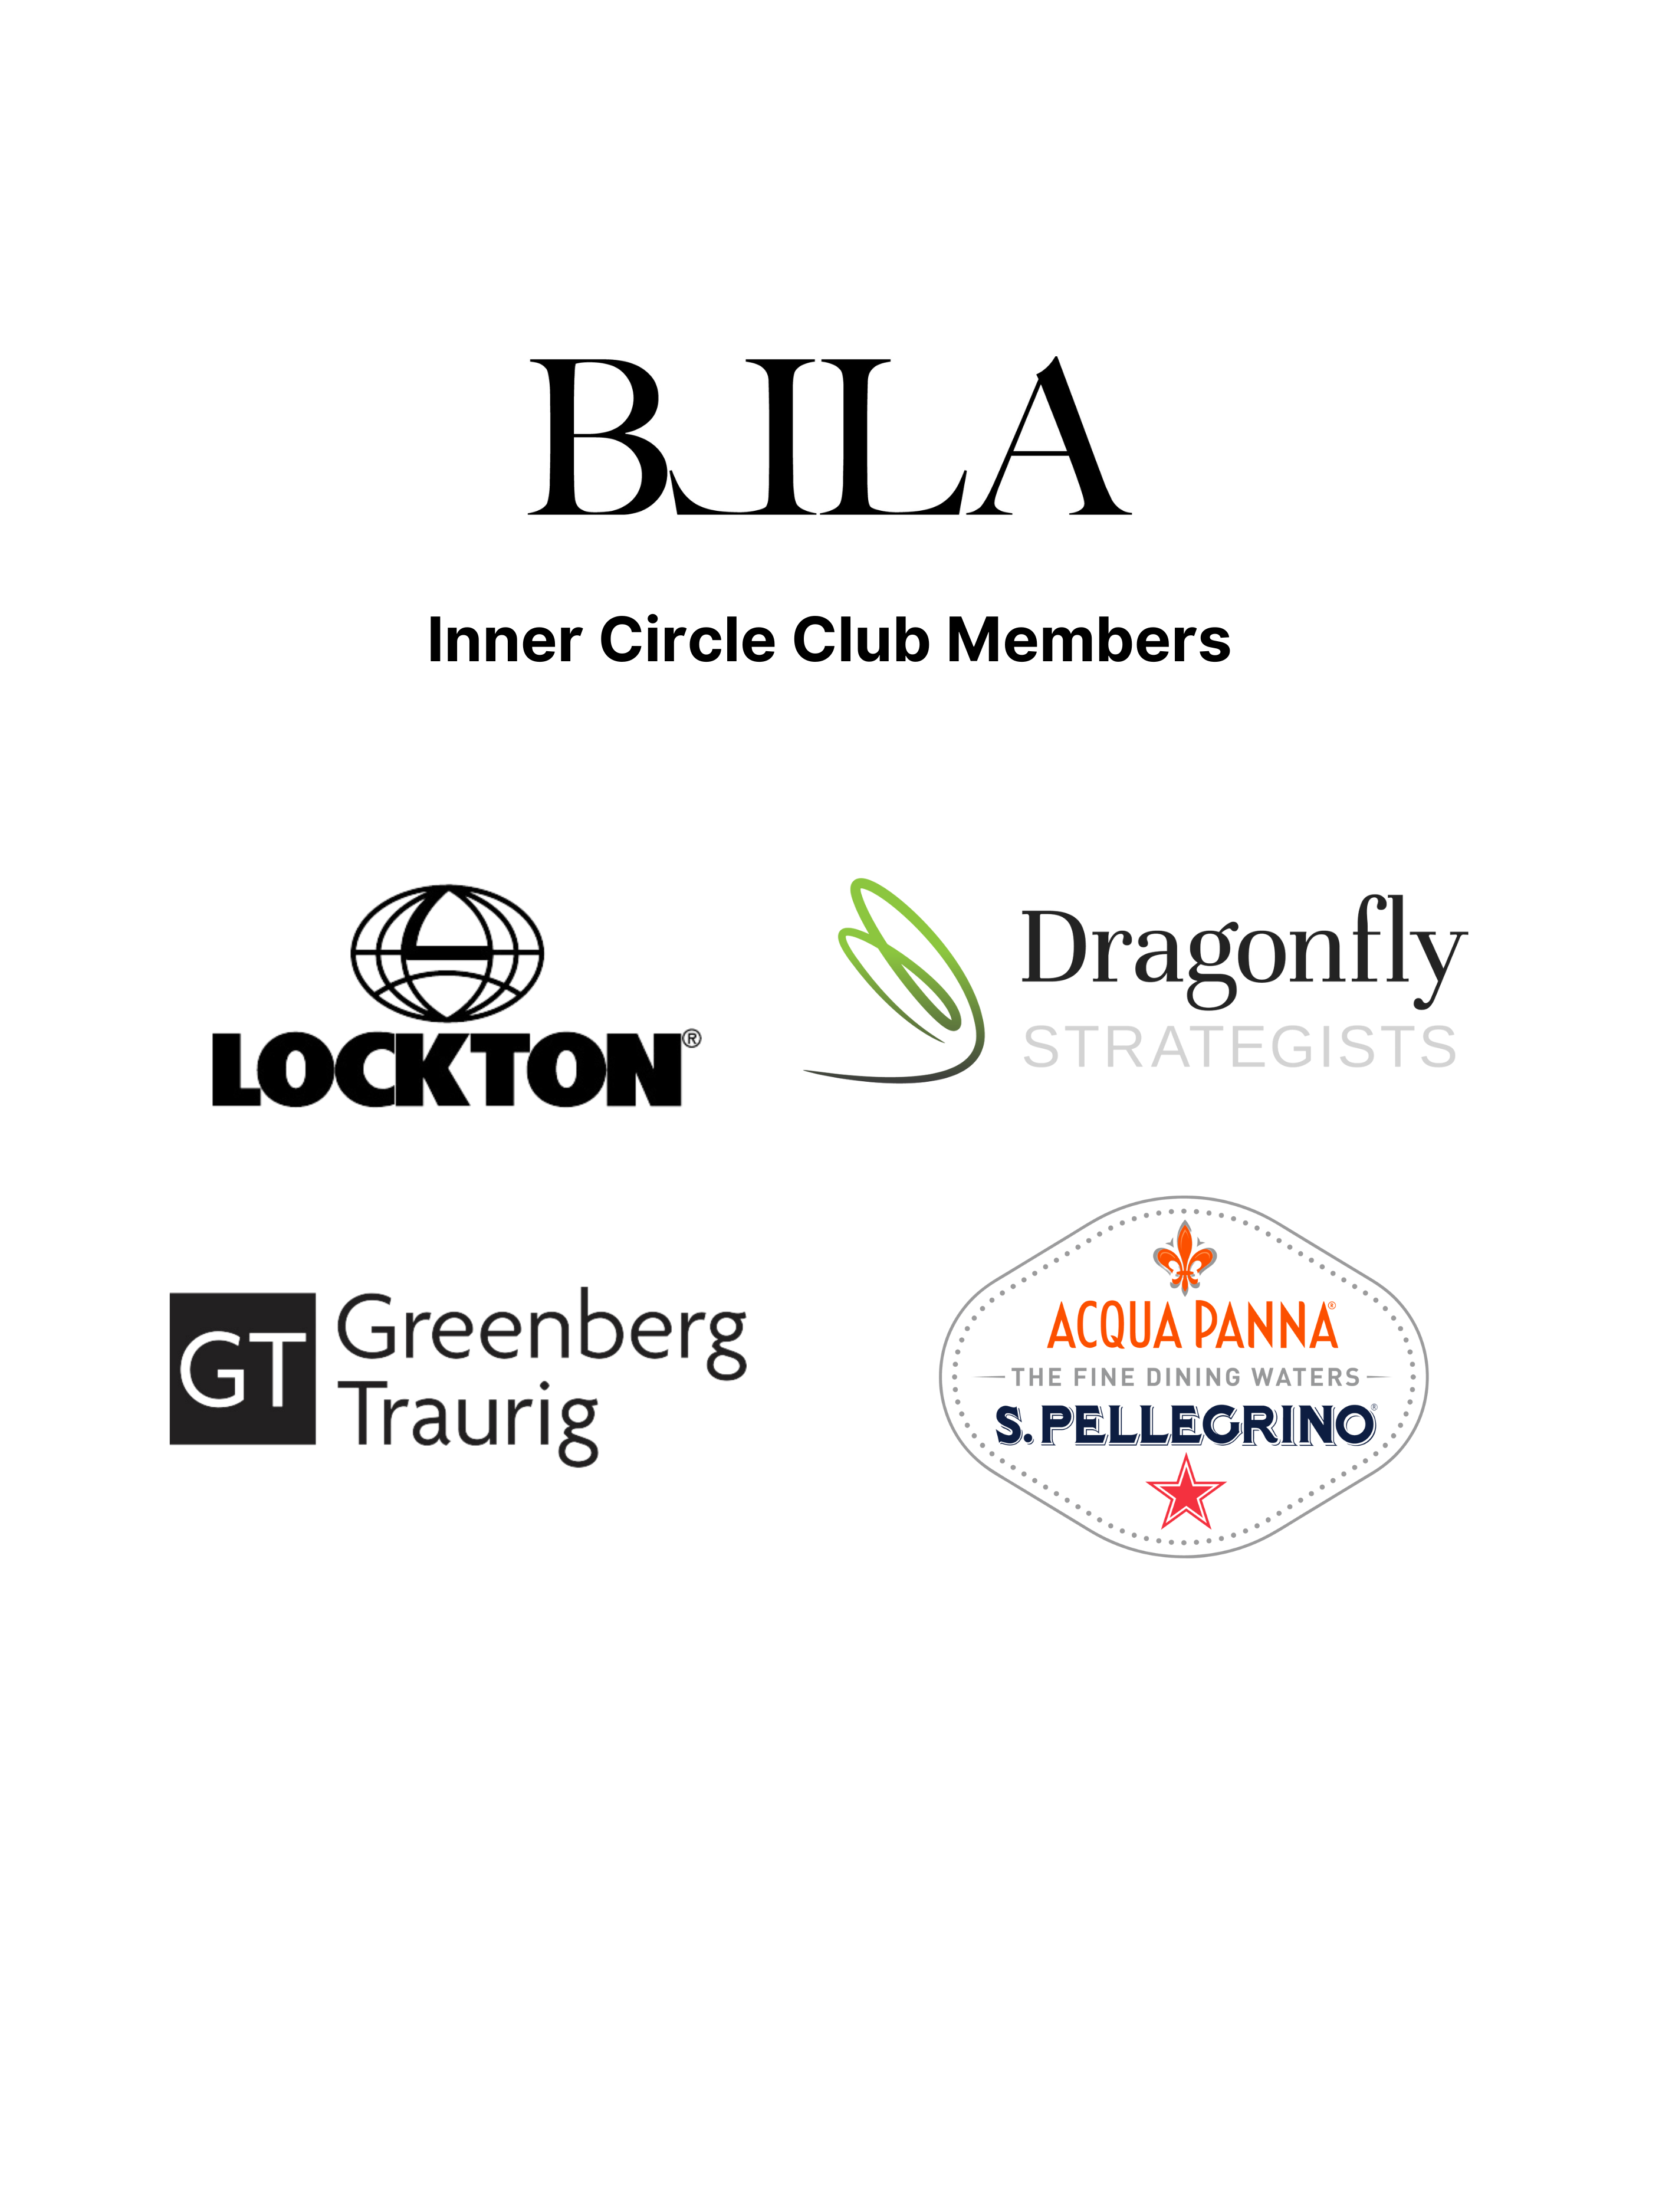 BLLA Announces New Inner Circle Club Members for 2023